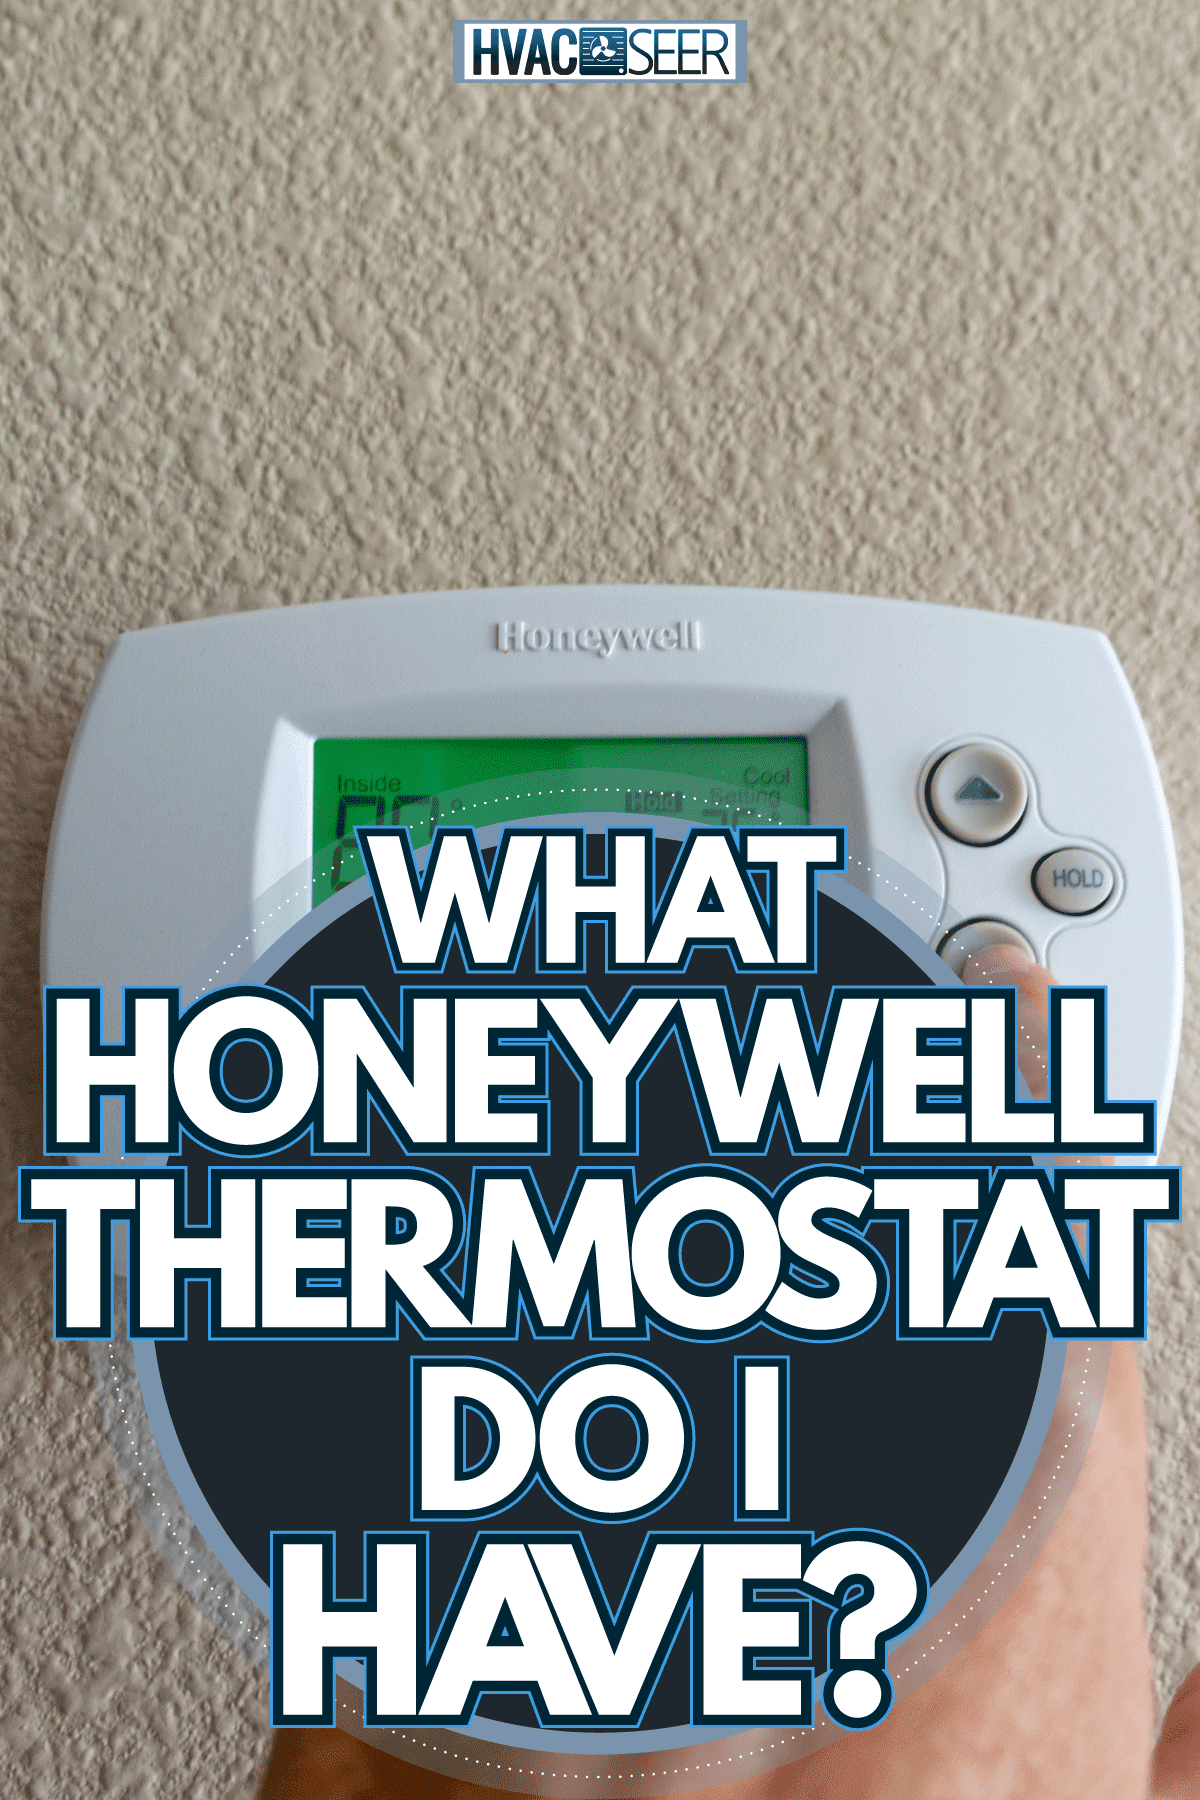 Adjusting the temperature of the Honeywell thermostat, What Honeywell Thermostat Do I Have?